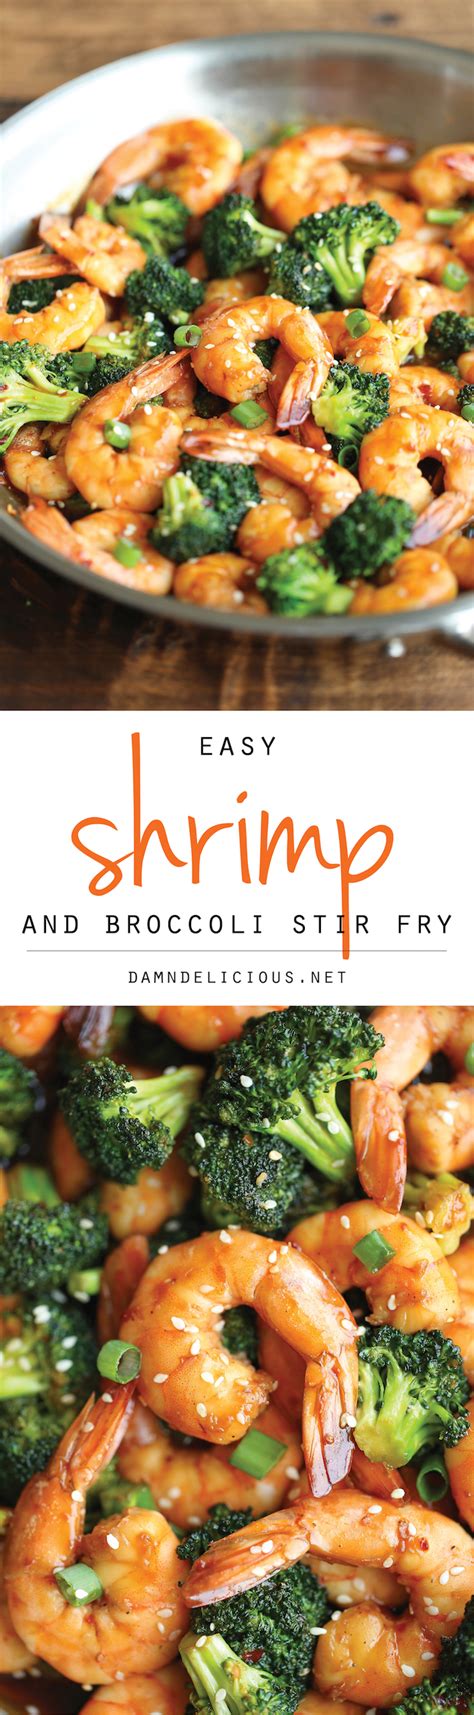 These cookies are especially made. Easy Shrimp and Broccoli Stir Fry - Damn Delicious